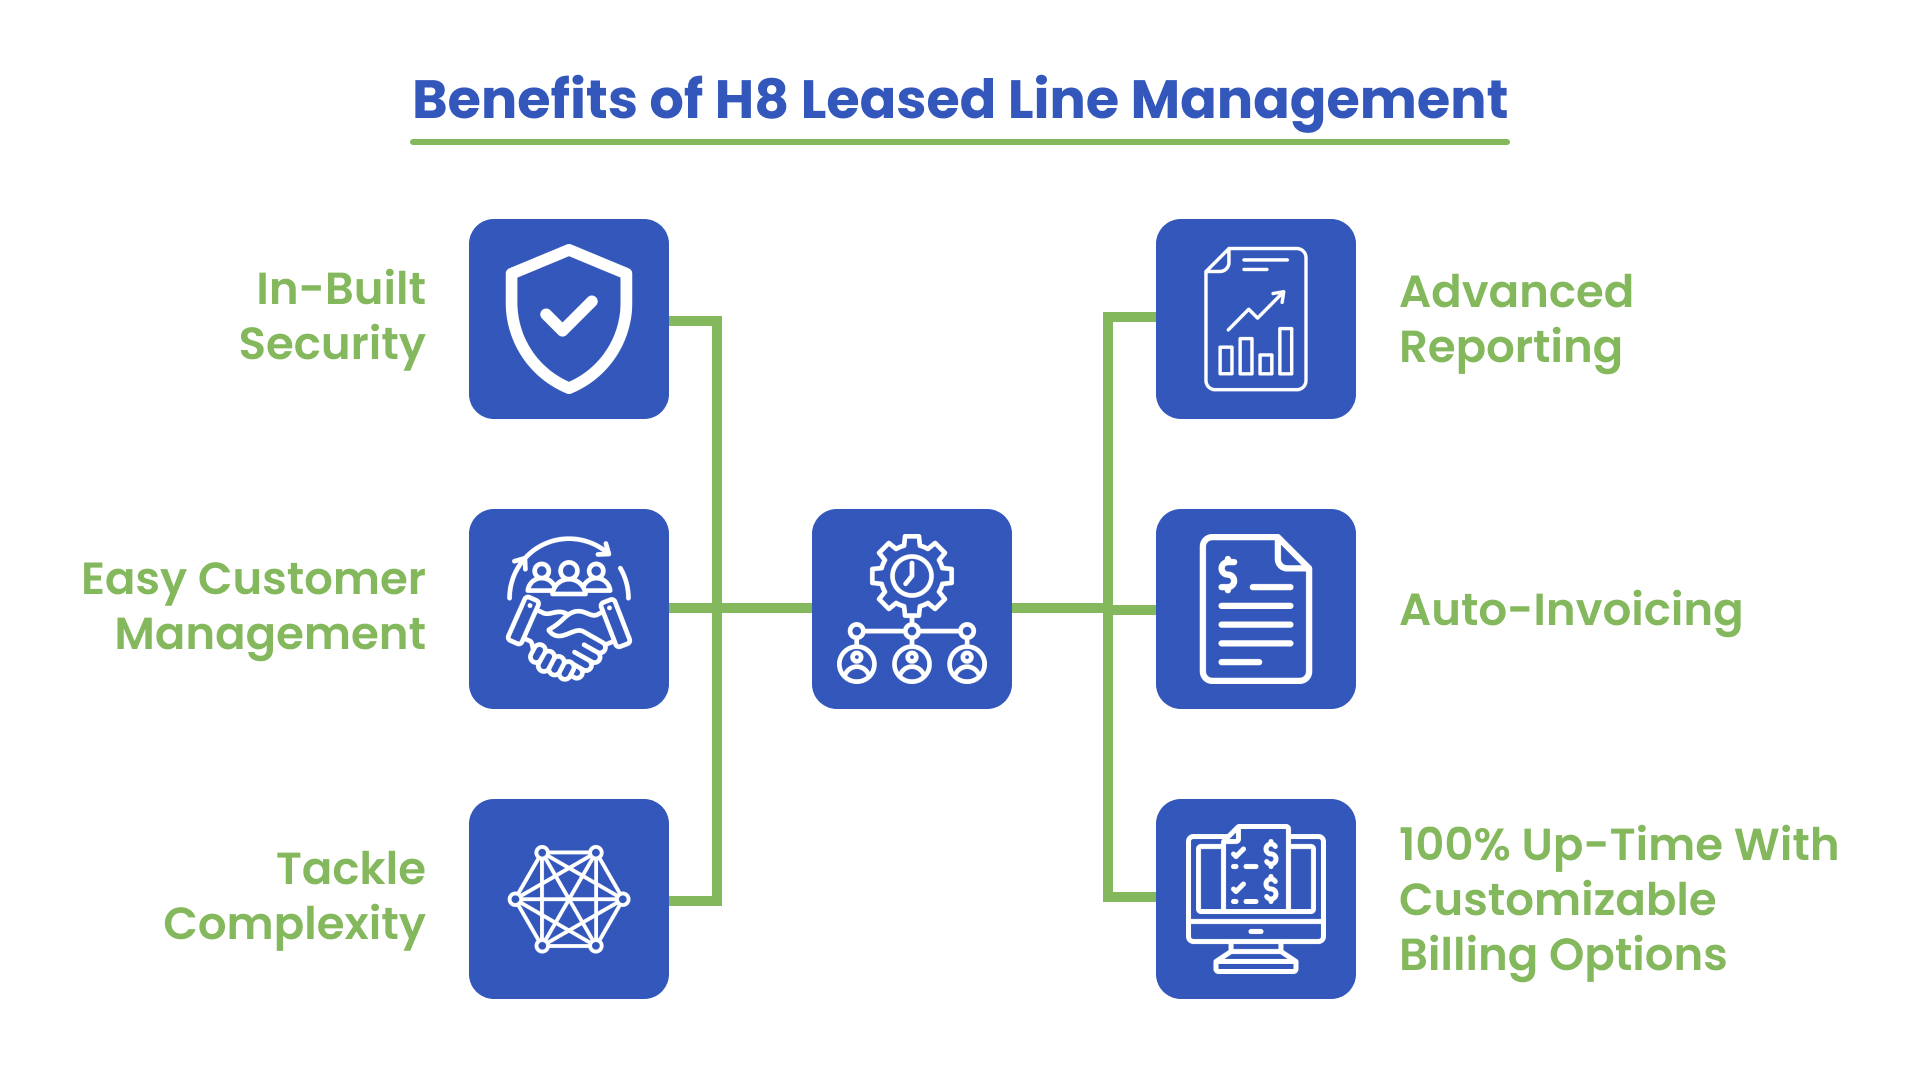 Benefits of Leased Line Management